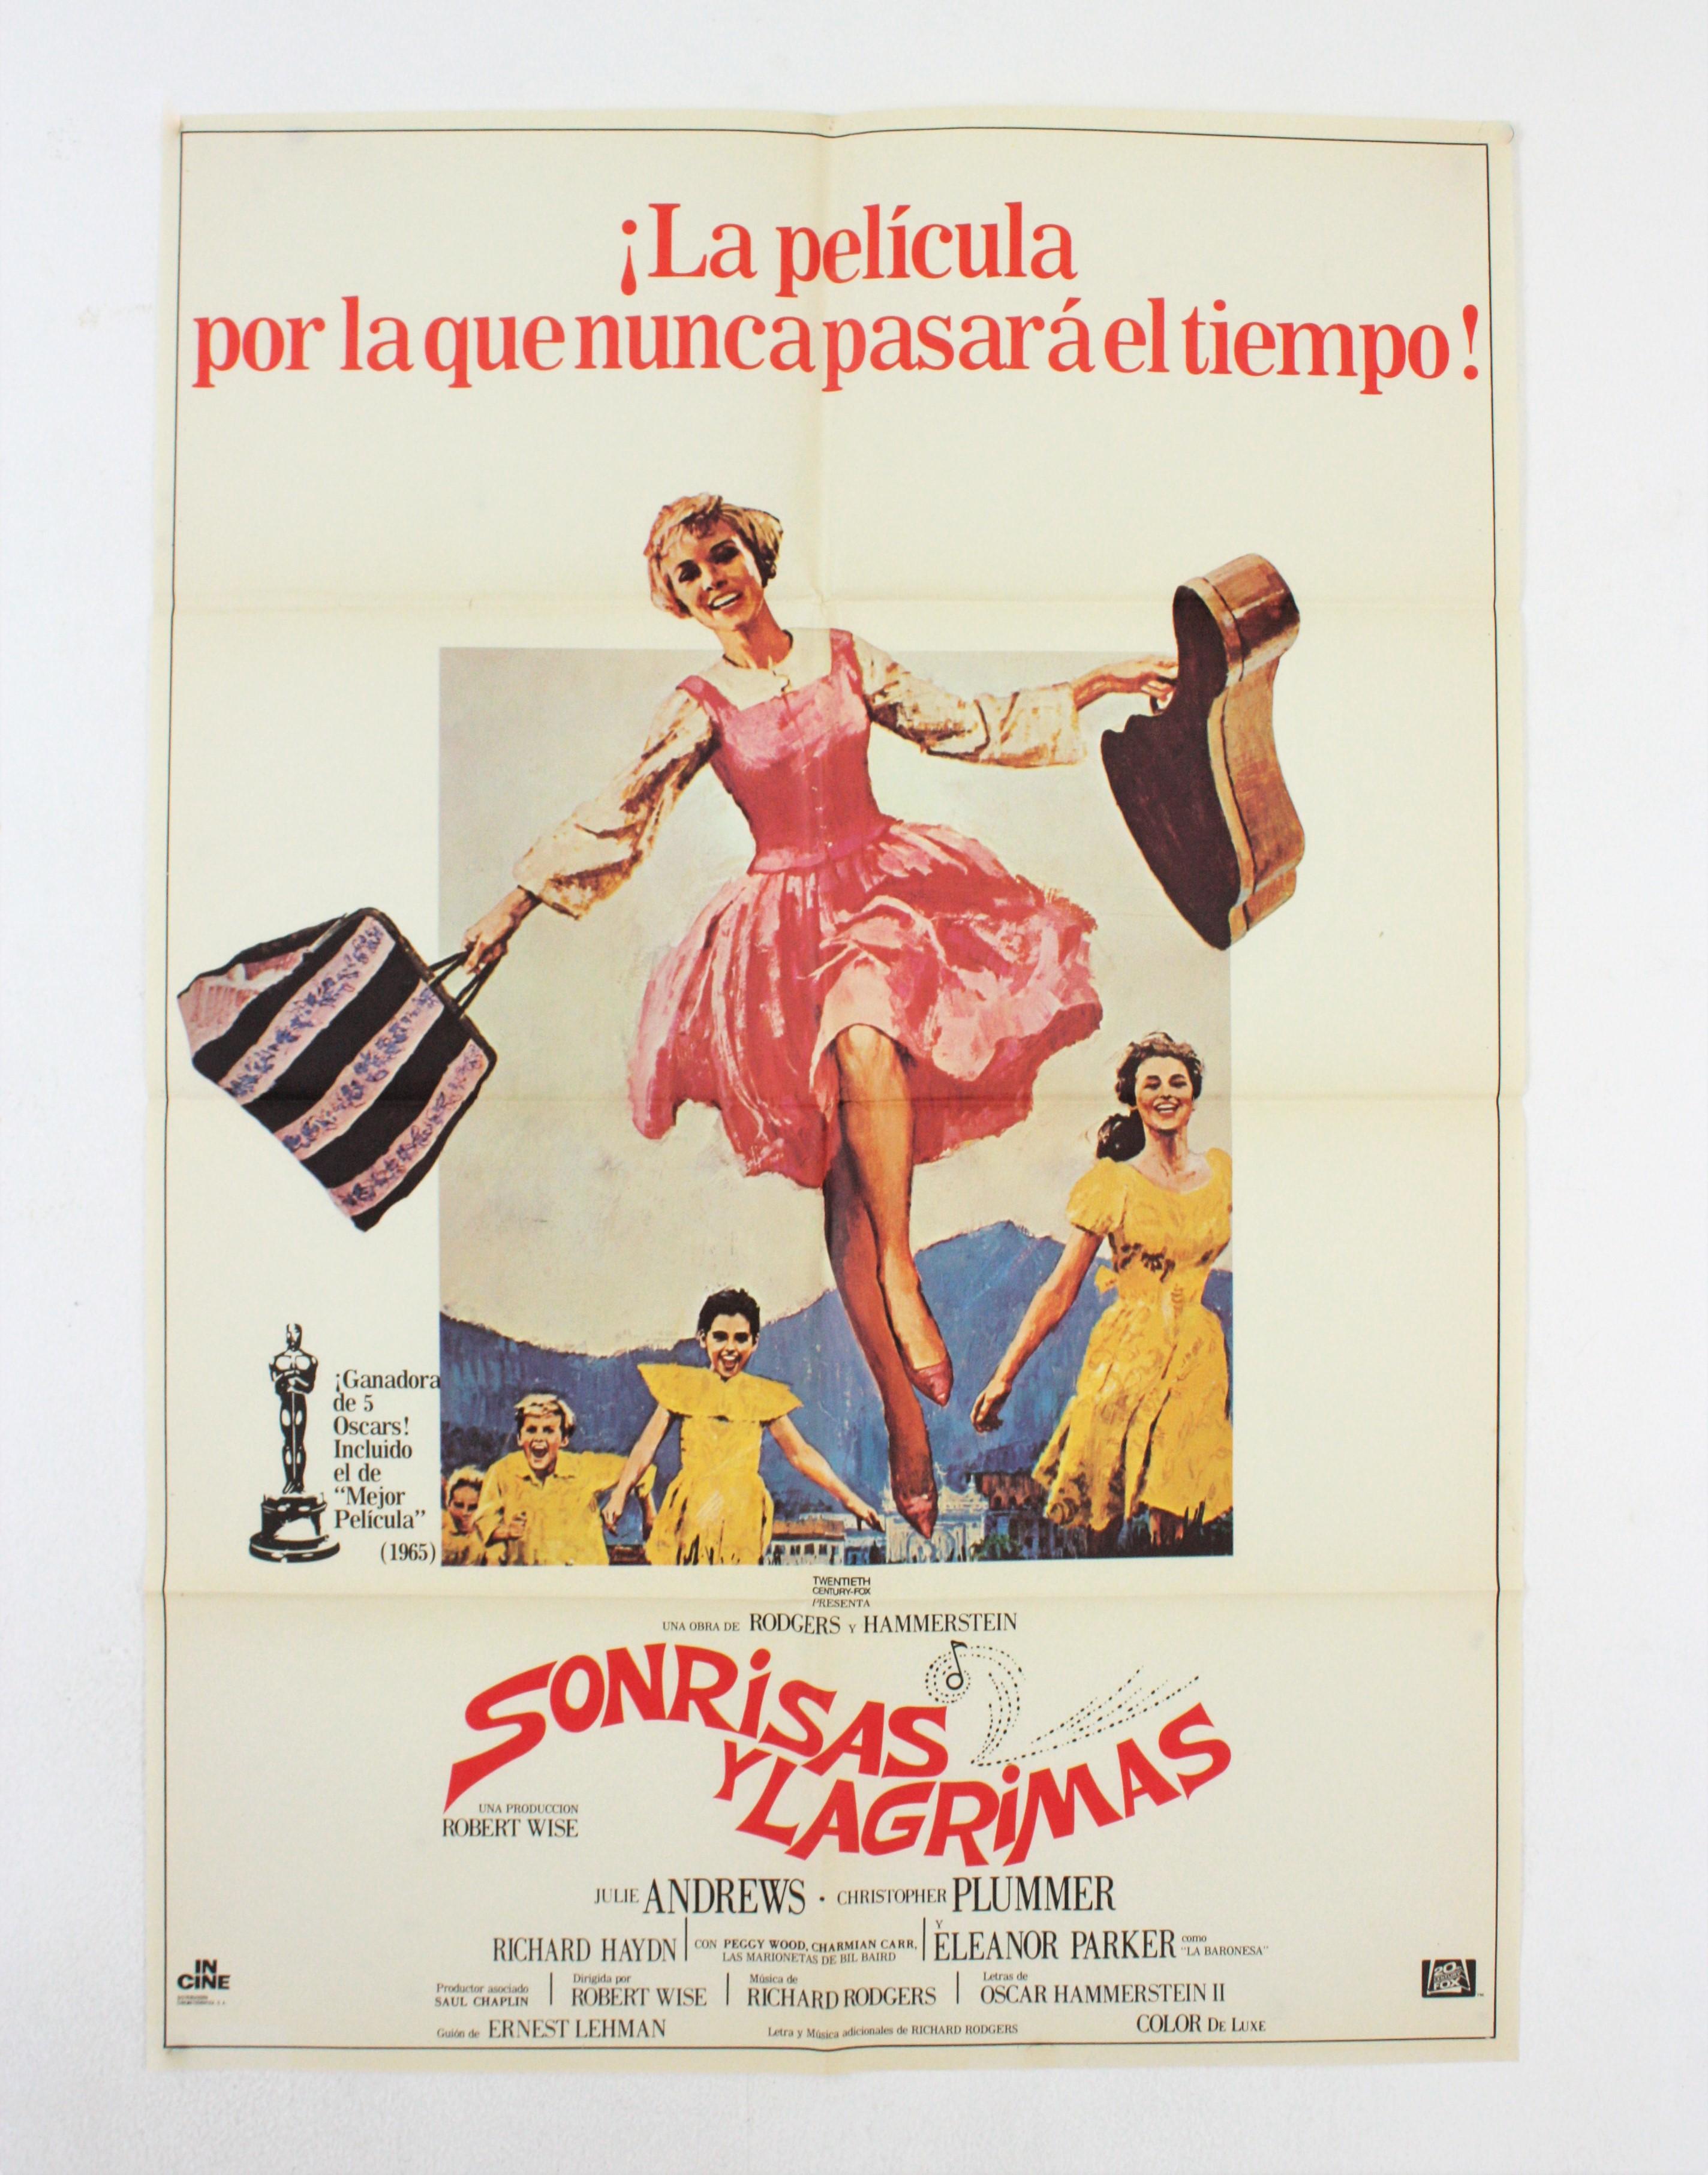 Original unframed the sound of Music (Sonrisas y Lágrimas ) Spanish Movie Poster, 1965
Good condition, folded. Many original posters were issued folded or were subsequently folded
Some fold marks.
Measures: 100 cm H x 70 cm W // 39.37 in H x